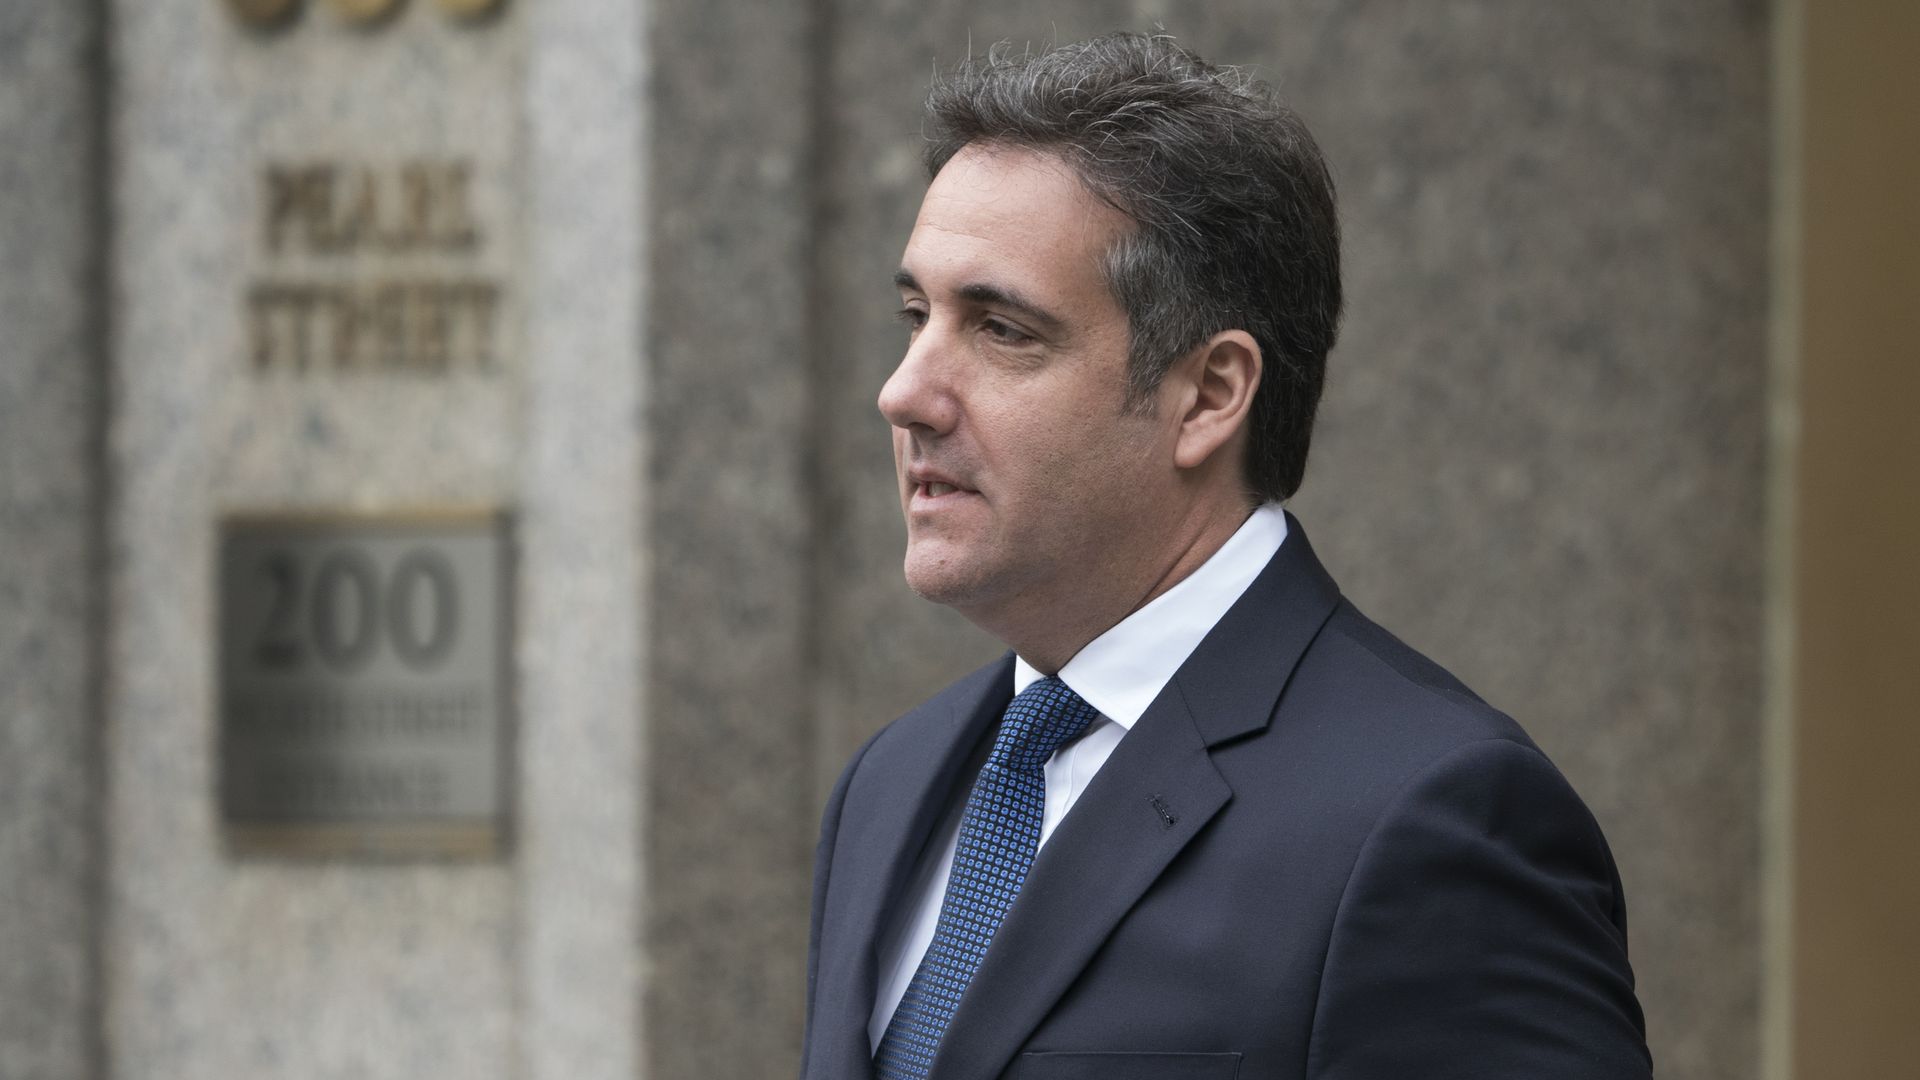 Michael Cohen, a longtime personal lawyer and confidante for President Donald Trump. Photo: Don Emmert/AFP/Getty Images